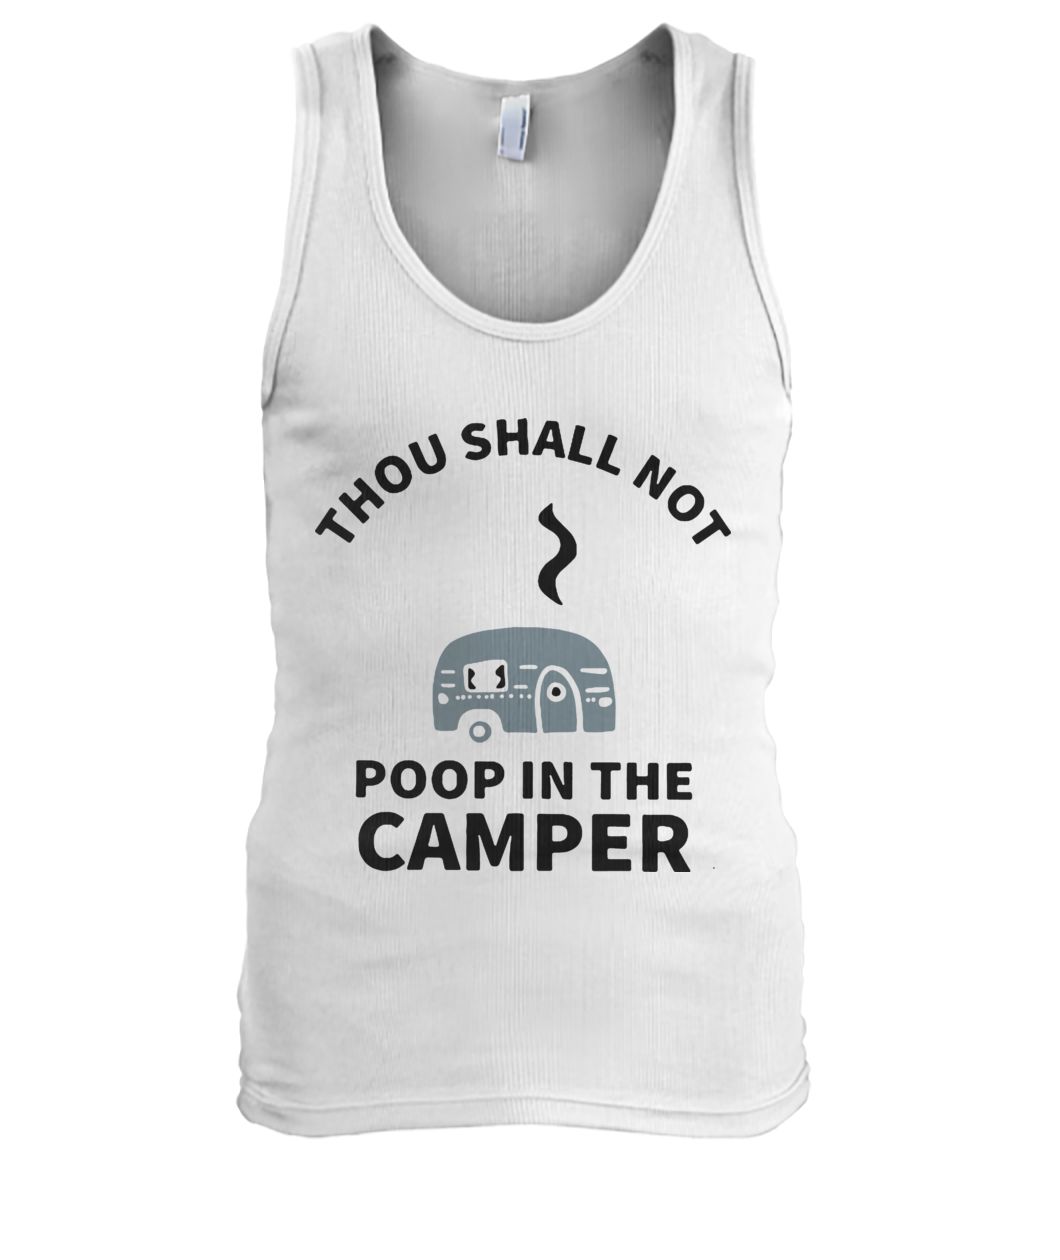 Thou shall not poop in the camper men's tank top